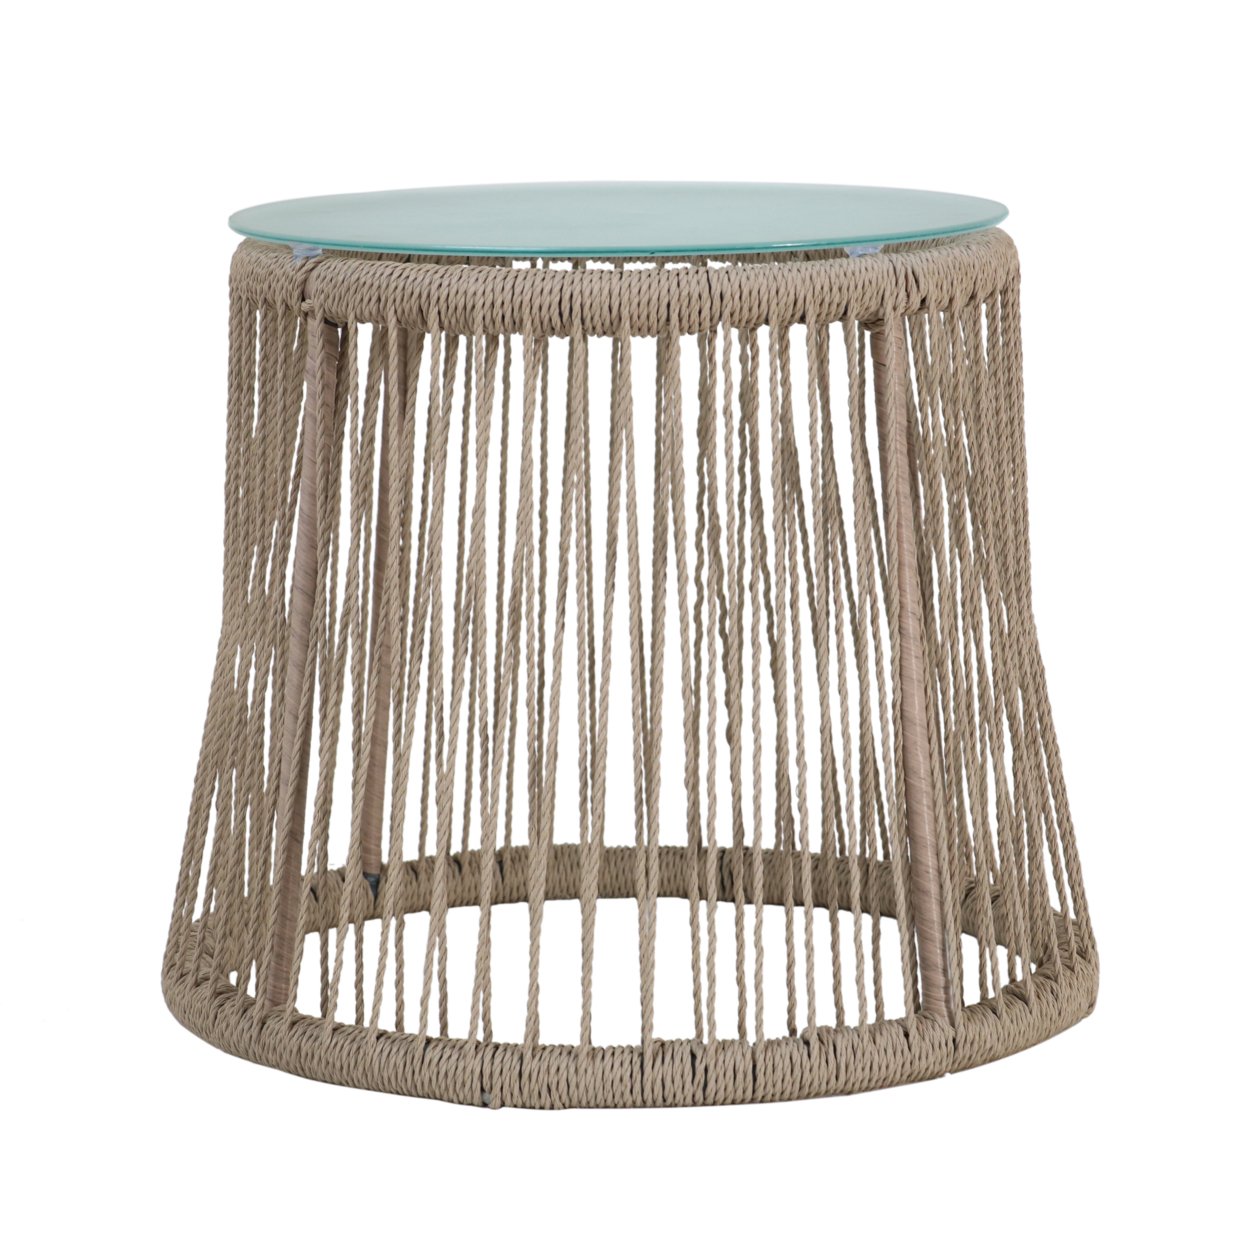 Karen Outdoor Side Table, Steel And Rope, Tempered Glass Table Top, Boho - Brown